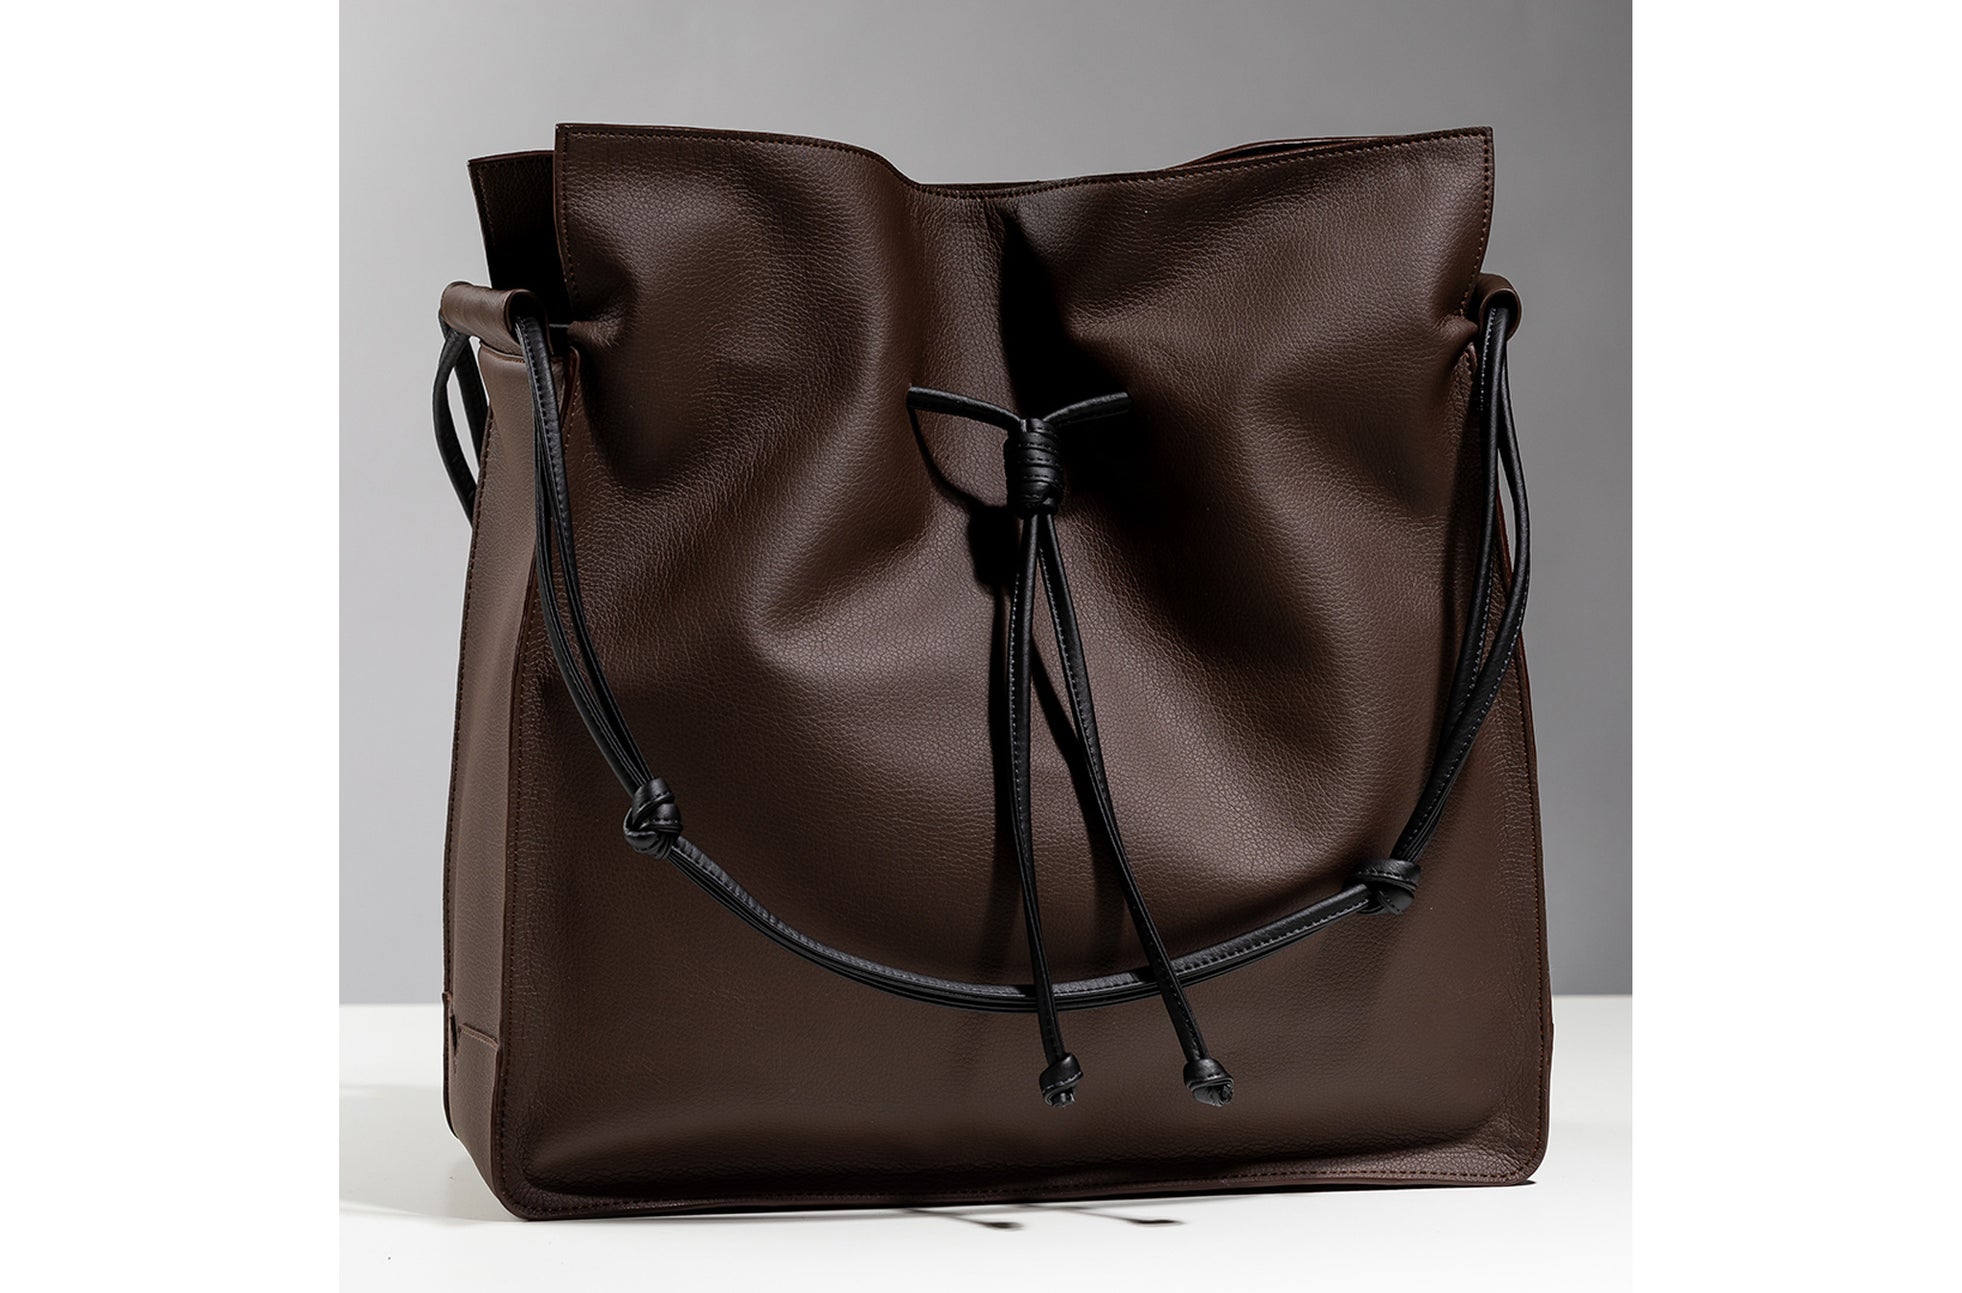 The Large Shopper in Technik-Leather in Taupe + Black image 5